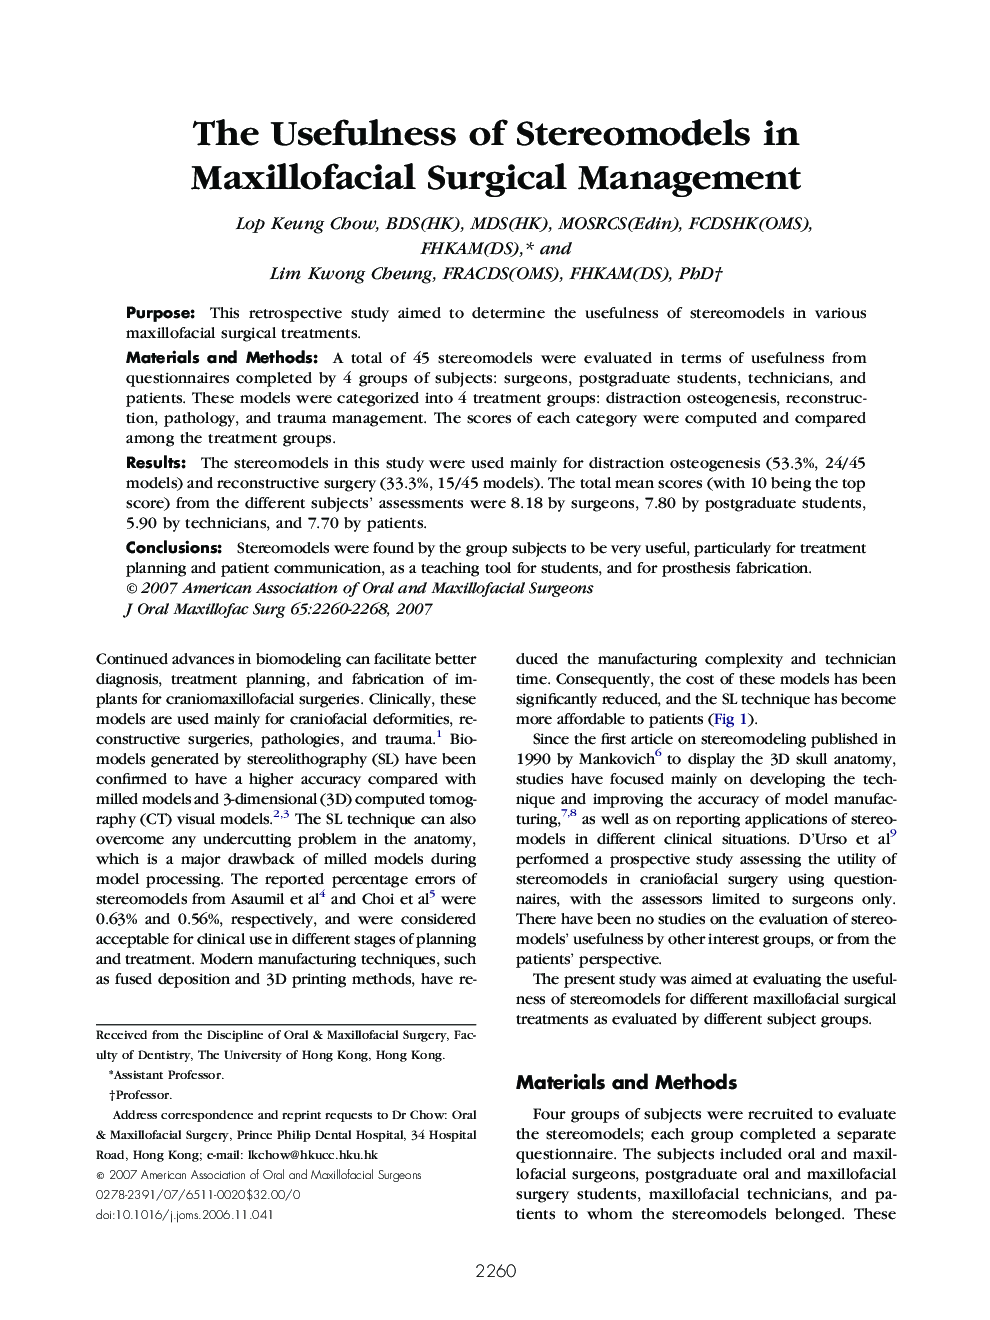 The Usefulness of Stereomodels in Maxillofacial Surgical Management